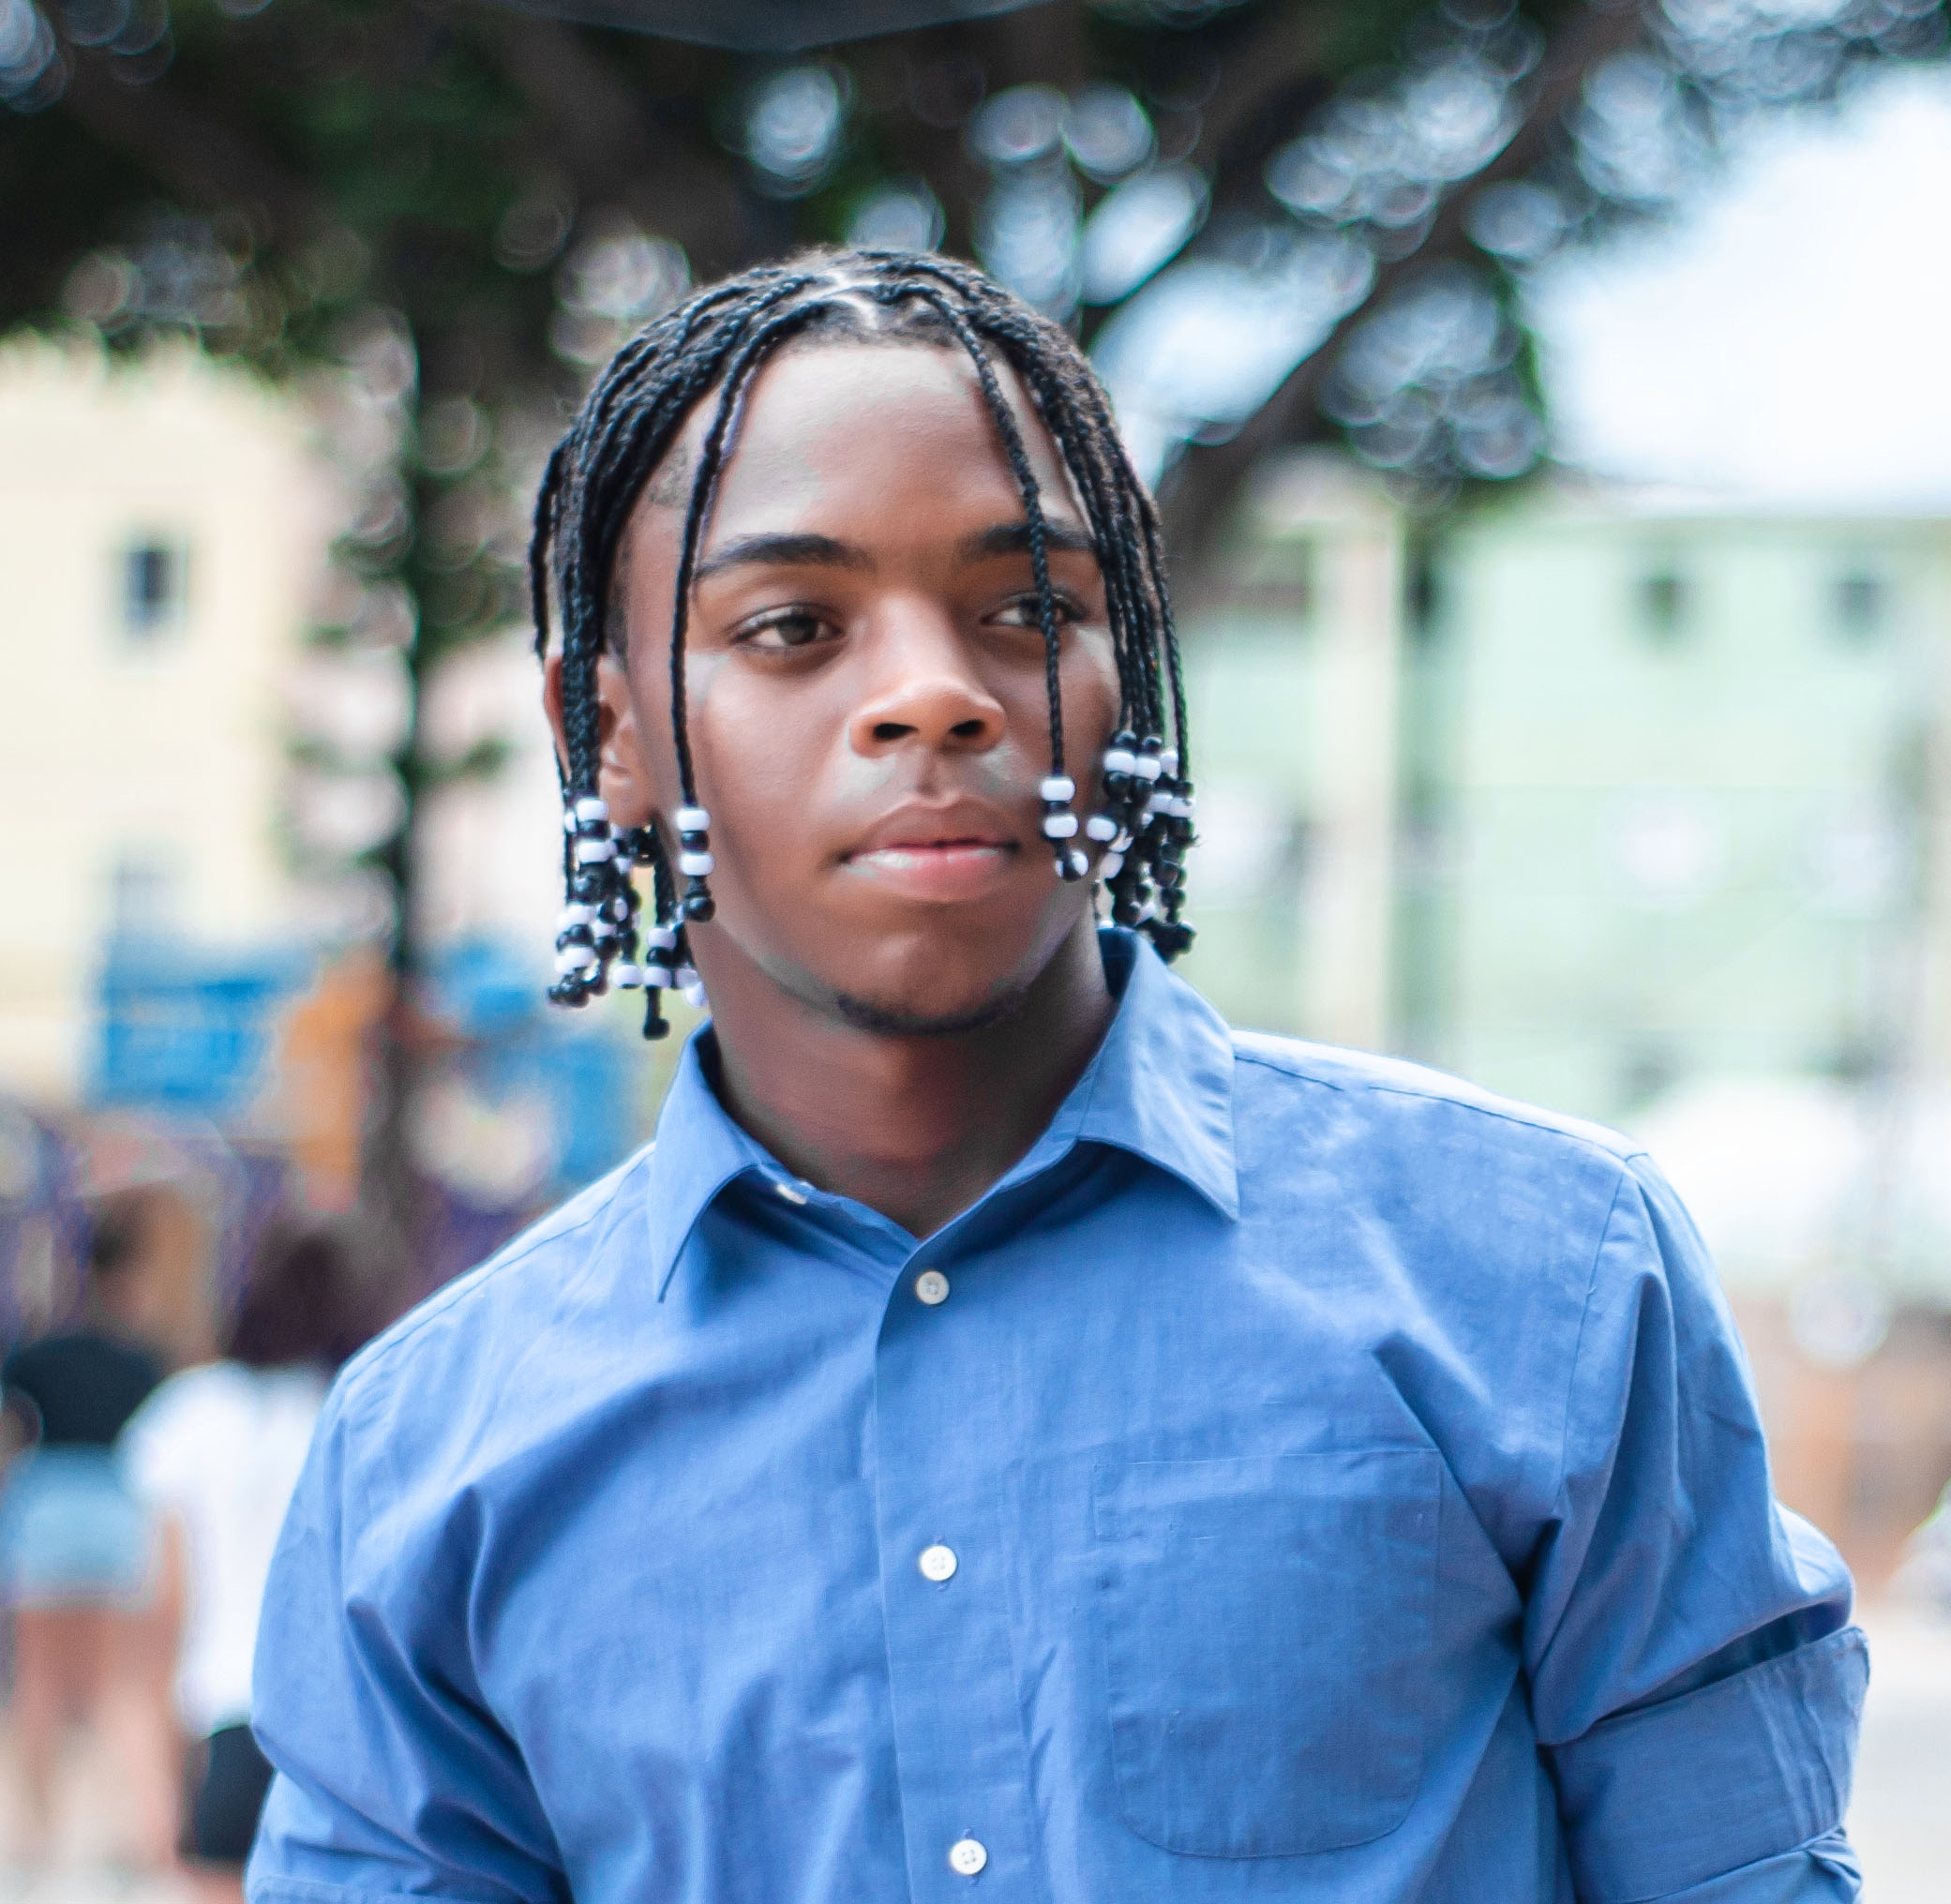 Young man with adornments on his braids